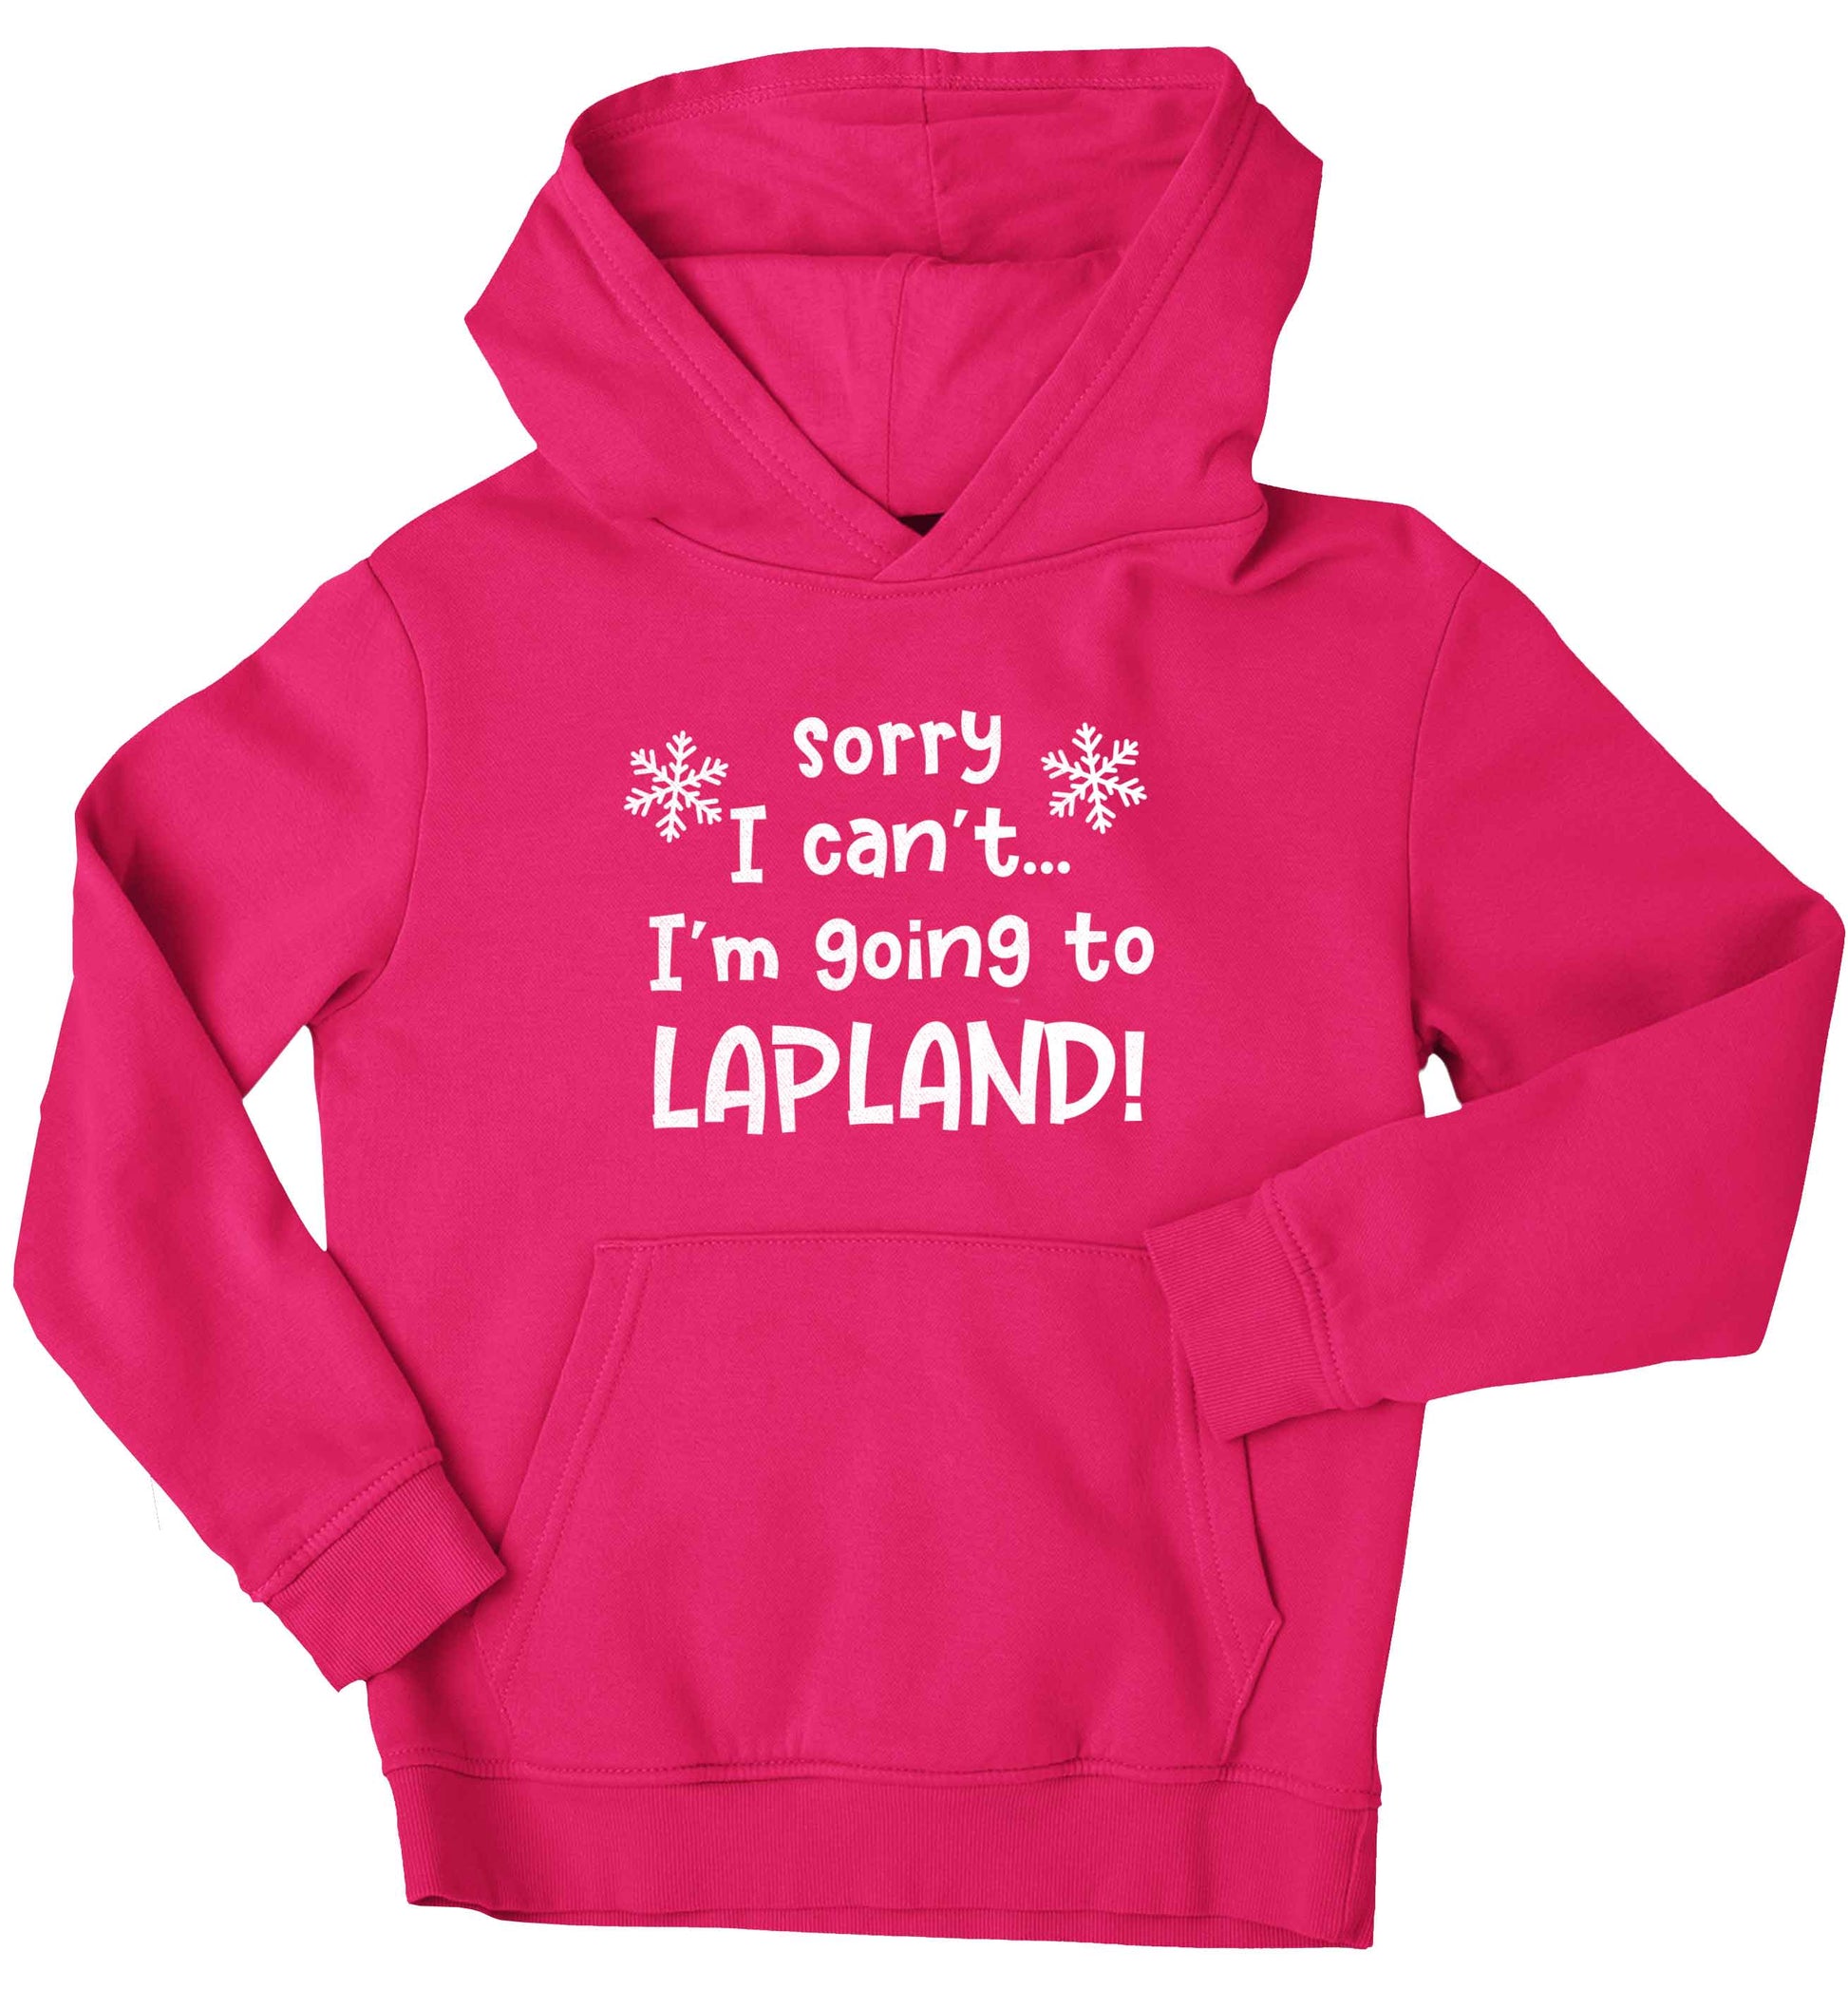 Sorry I can't I'm going to Lapland children's pink hoodie 12-13 Years